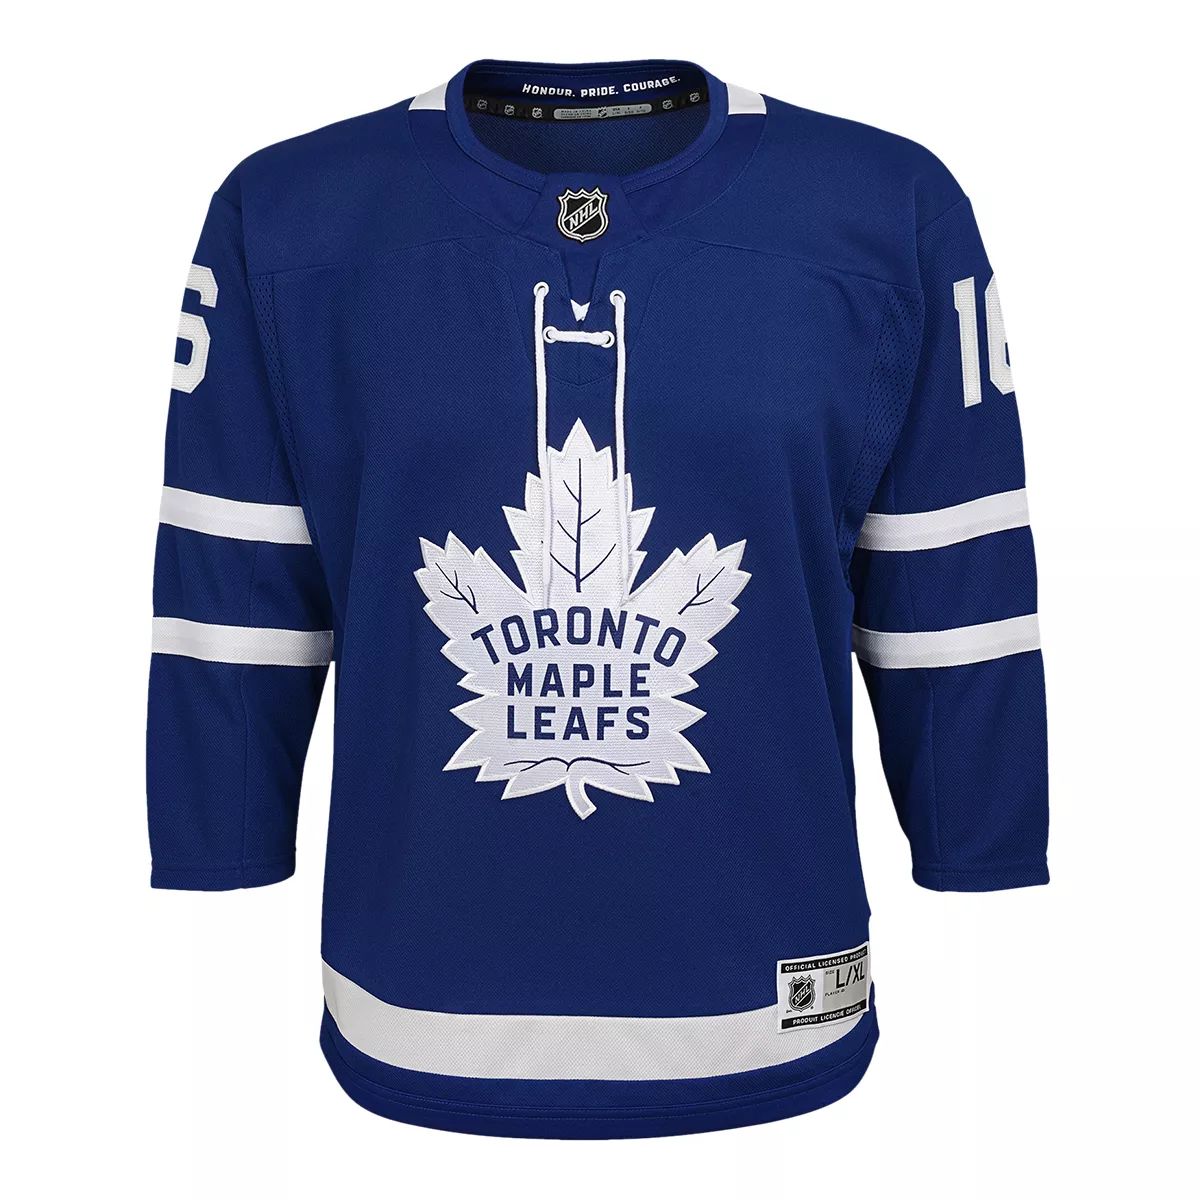 Toronto Maple Leafs licensed Toddler Replica (INFANT) Home NHL